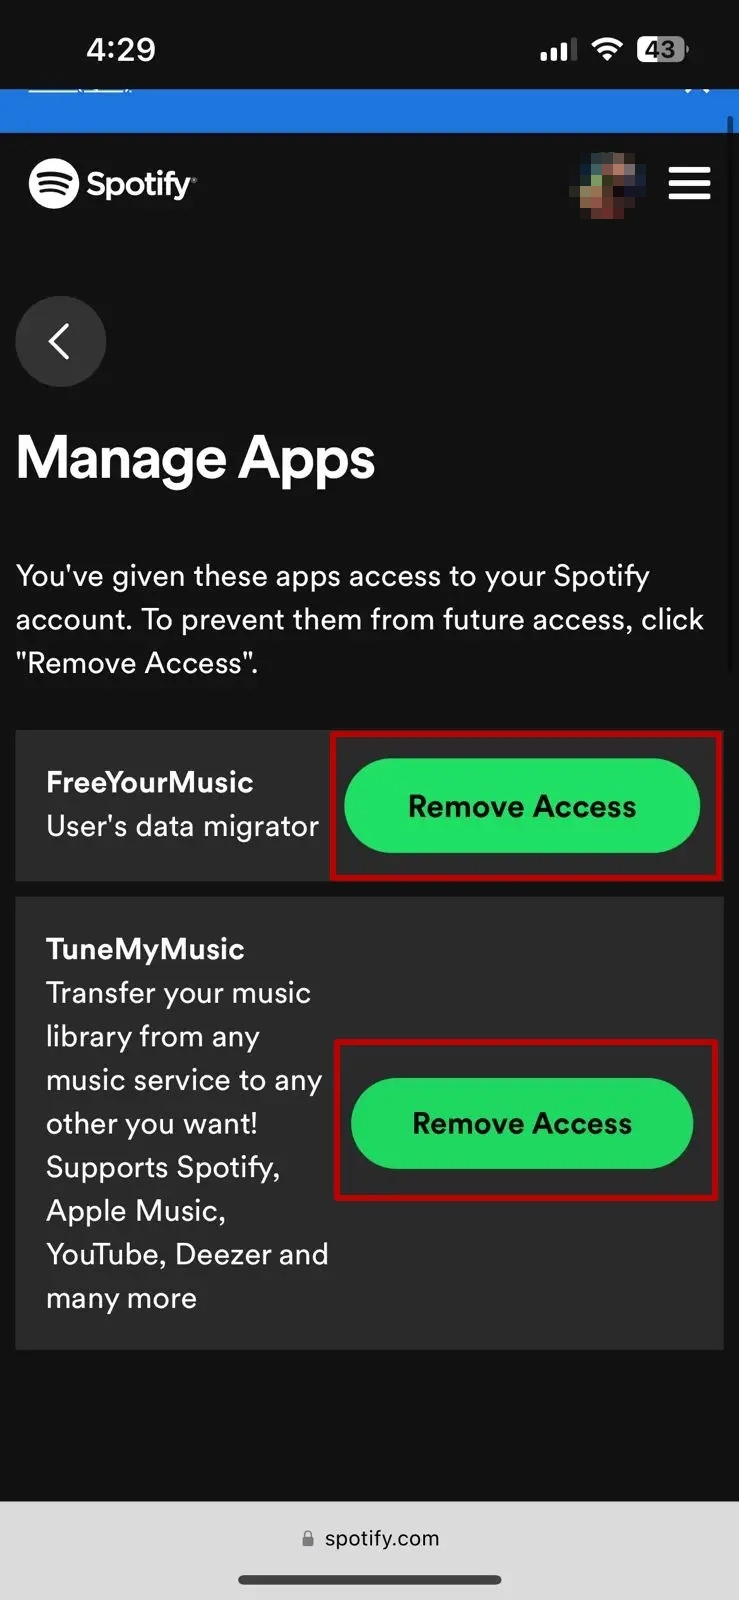 Spotify Manage Apps